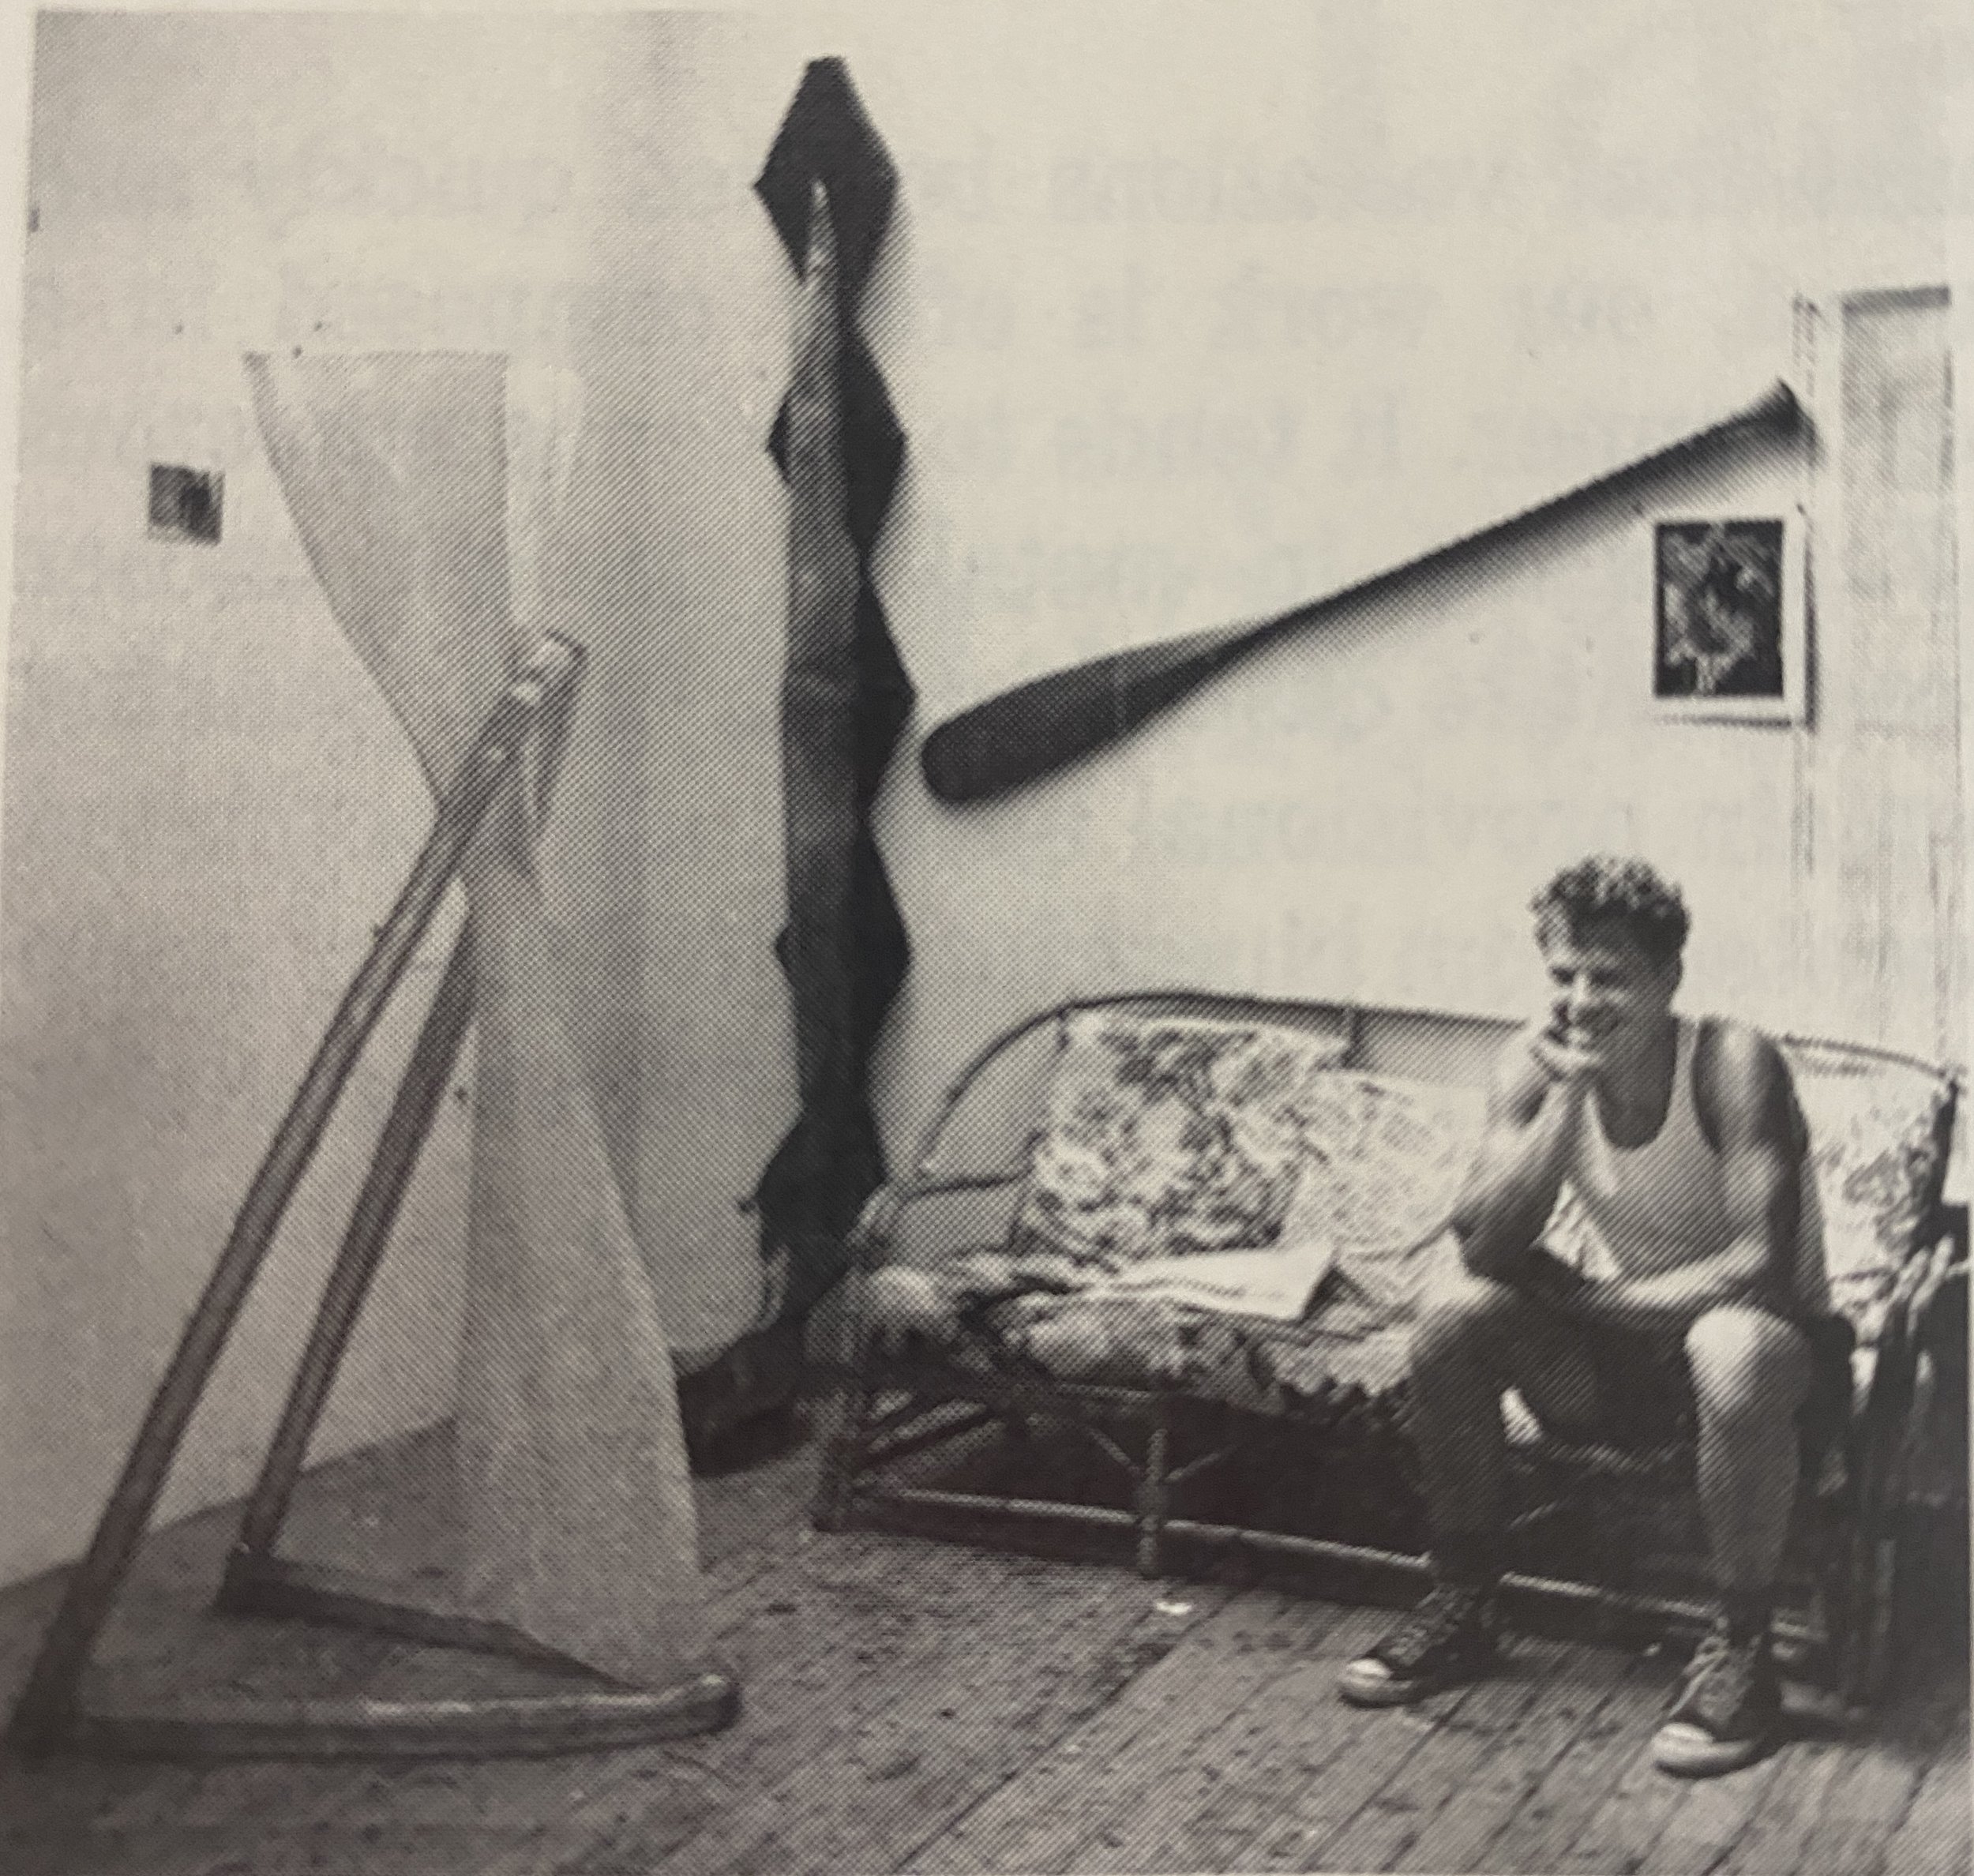  Artist in the studio with M.R., New York City, 1984  Butter is probably attracted to the resin/cloth combination for the reasons other sculptors have been: fiberglass is relatively simple to master, requires little equipment to work, can produce obj